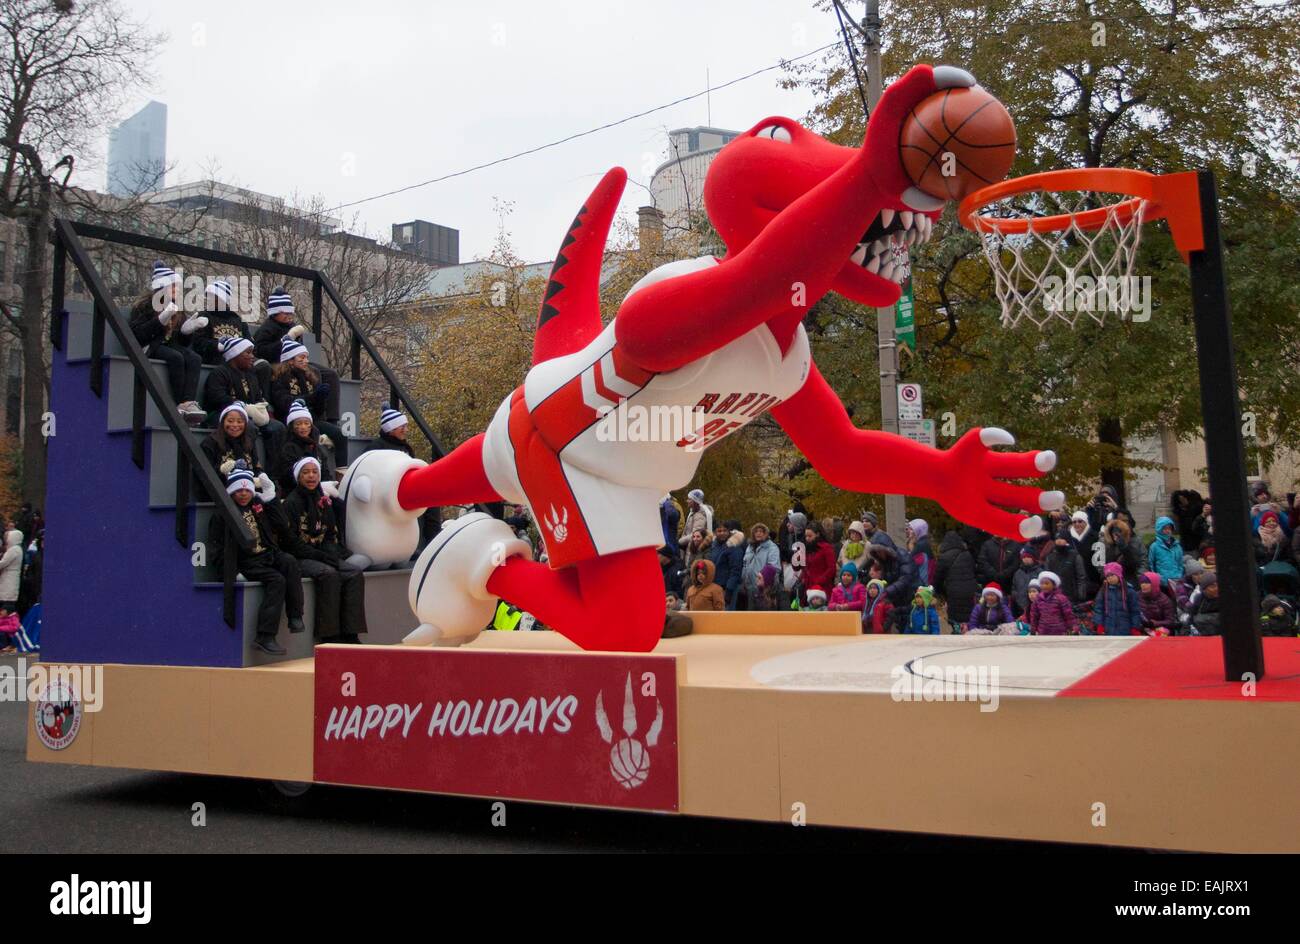 (141117) -- TORONTO, Nov. 17, 2014 (Xinhua)-- A float of Toronto Raptors' mascot is on display during the 110th Annual Toronto Santa Claus Parade in Toronto, Canada, Nov. 16, 2014. With 21 bands, 31 floats and more than 3,000 volunteers, the Parade kicked off at Toronto on Sunday. (Xinhua/Zou Zheng) Stock Photo